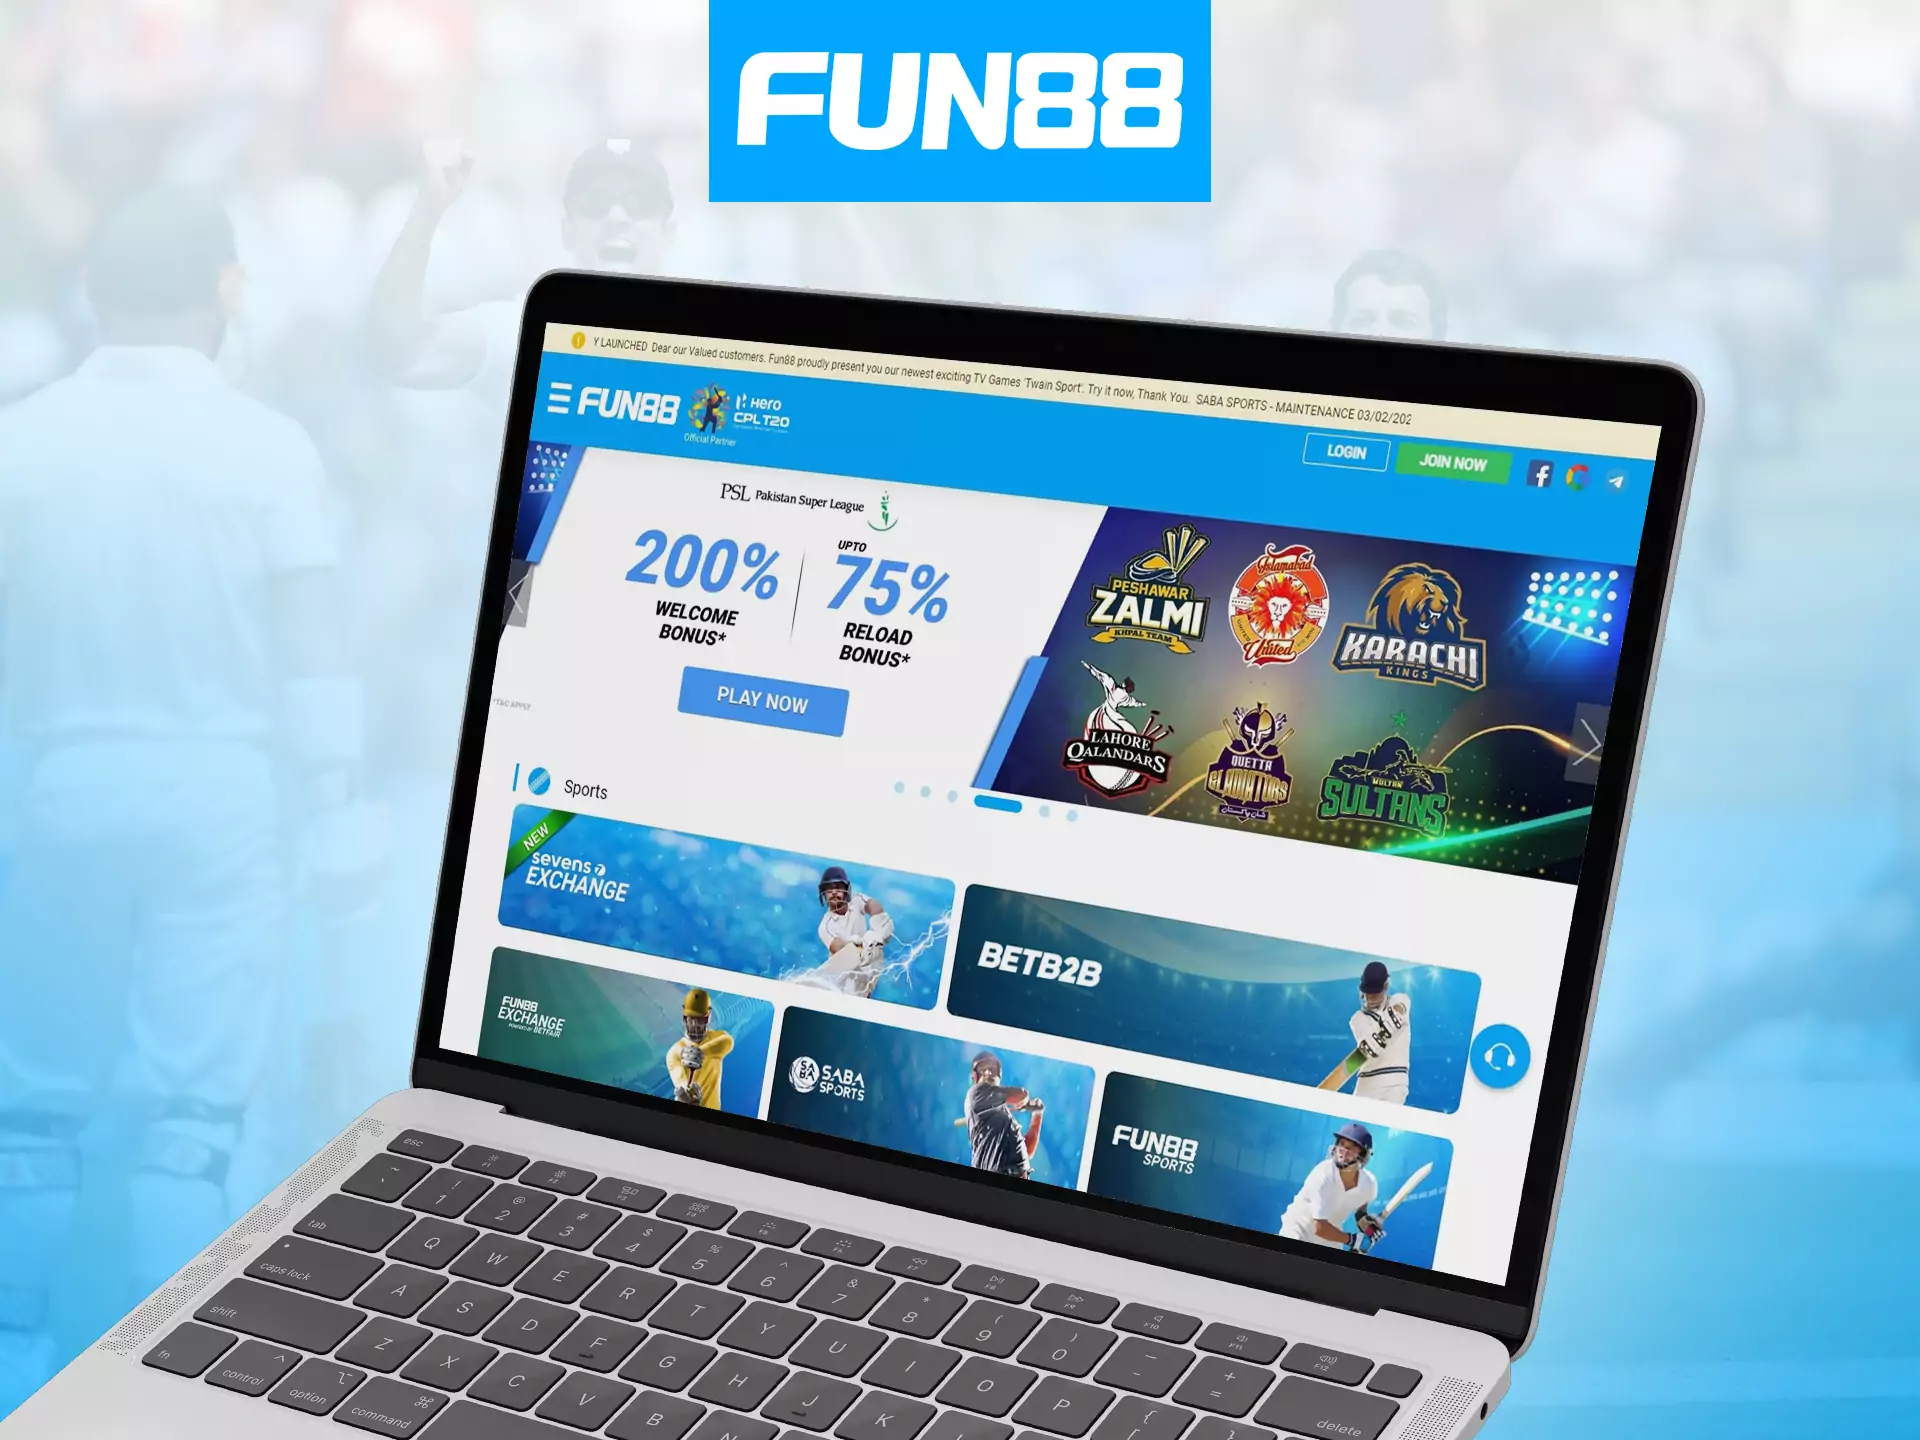 Place your bets and play on Fun88 using the client for your personal computer.